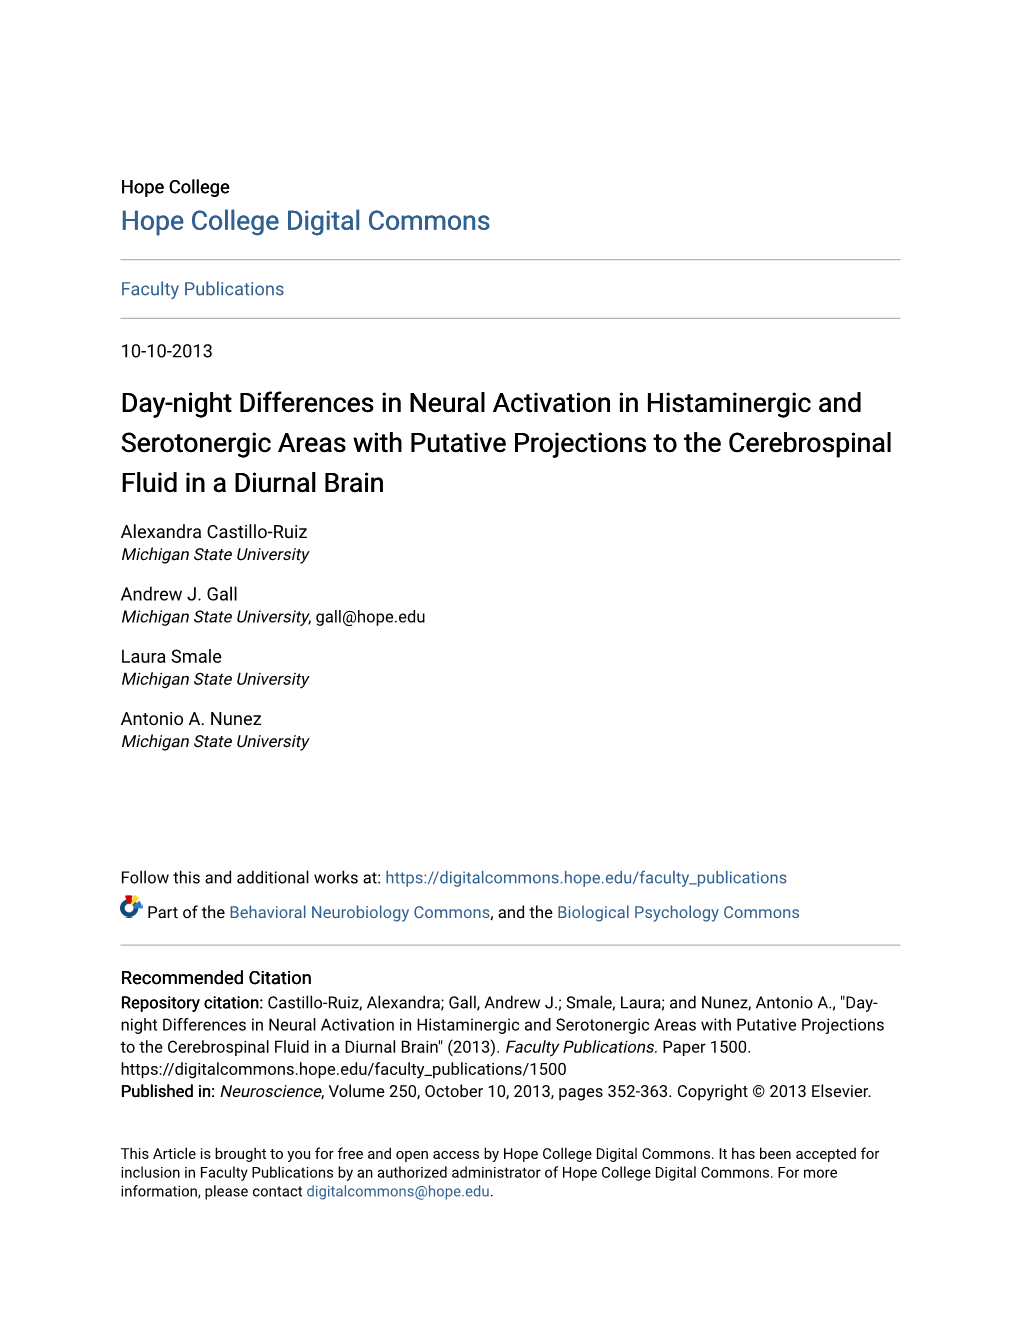 Day-Night Differences in Neural Activation in Histaminergic and Serotonergic Areas with Putative Projections to the Cerebrospinal Fluid in a Diurnal Brain